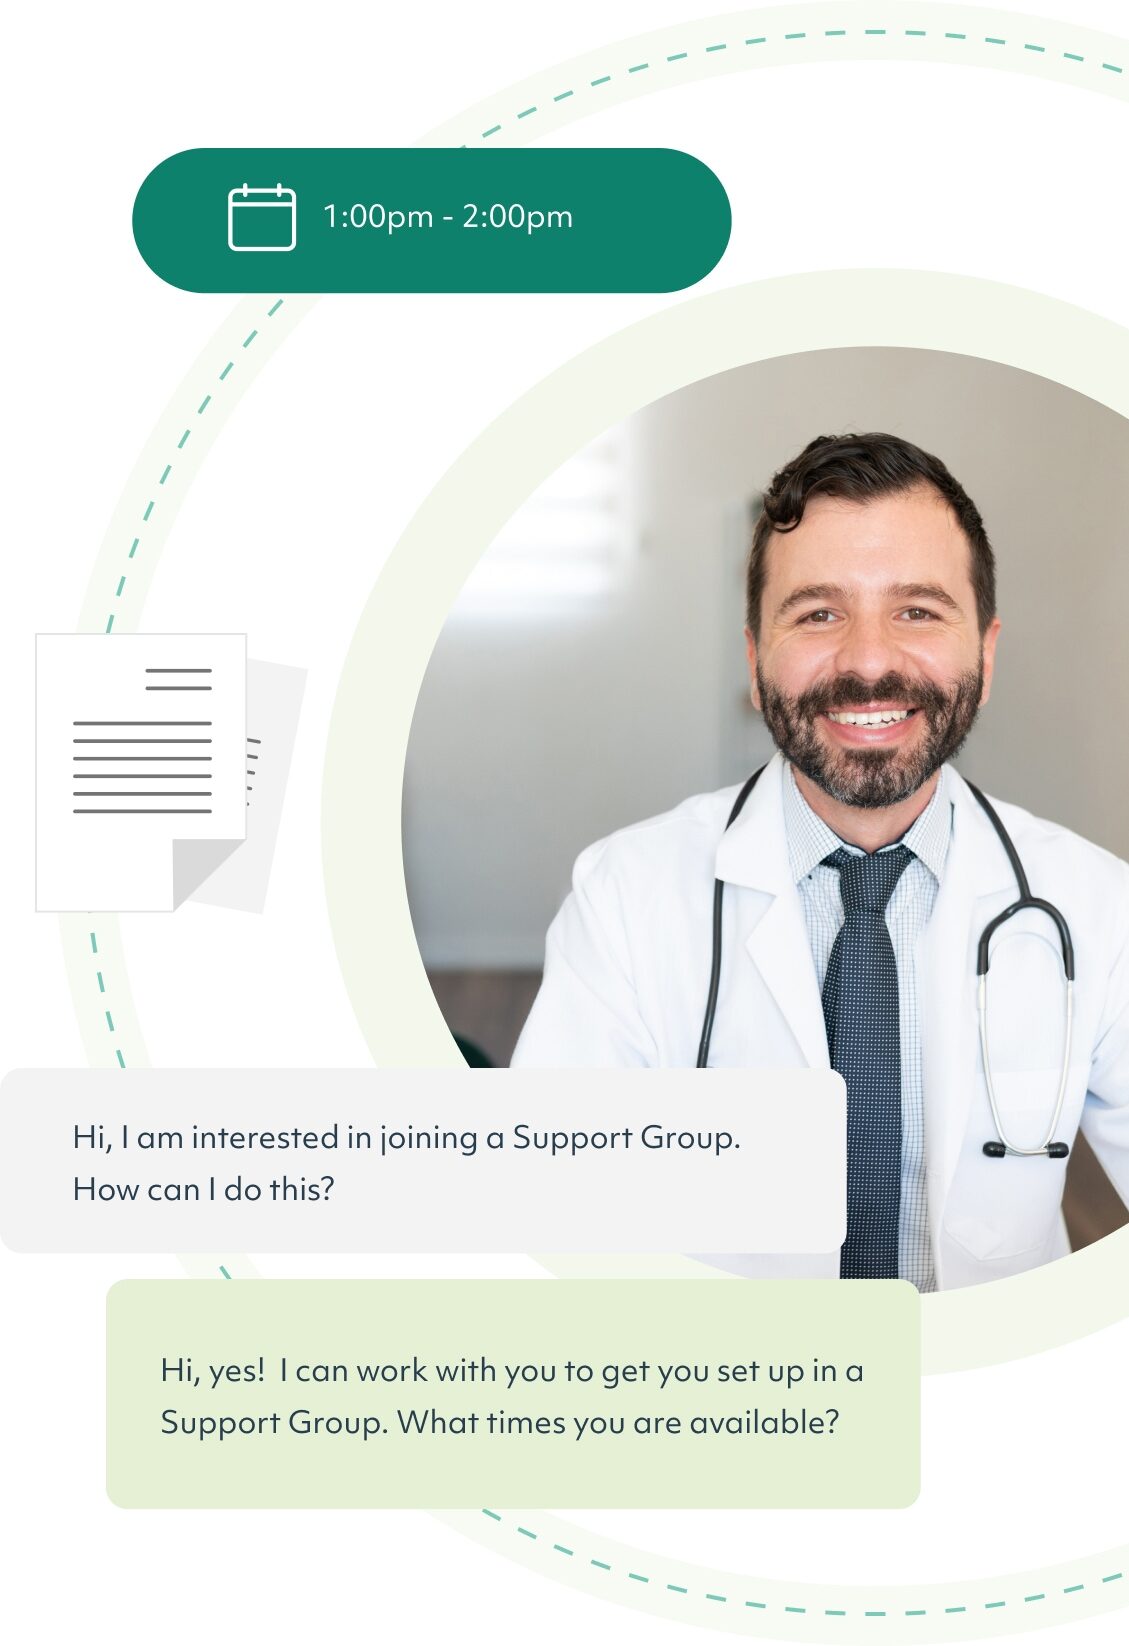 A green circle where a photo of a doctor is within the center. Around the doctor are icons representing booking an appointment, filing paprewor, and texting with a WorkIt Health representative for assistance.